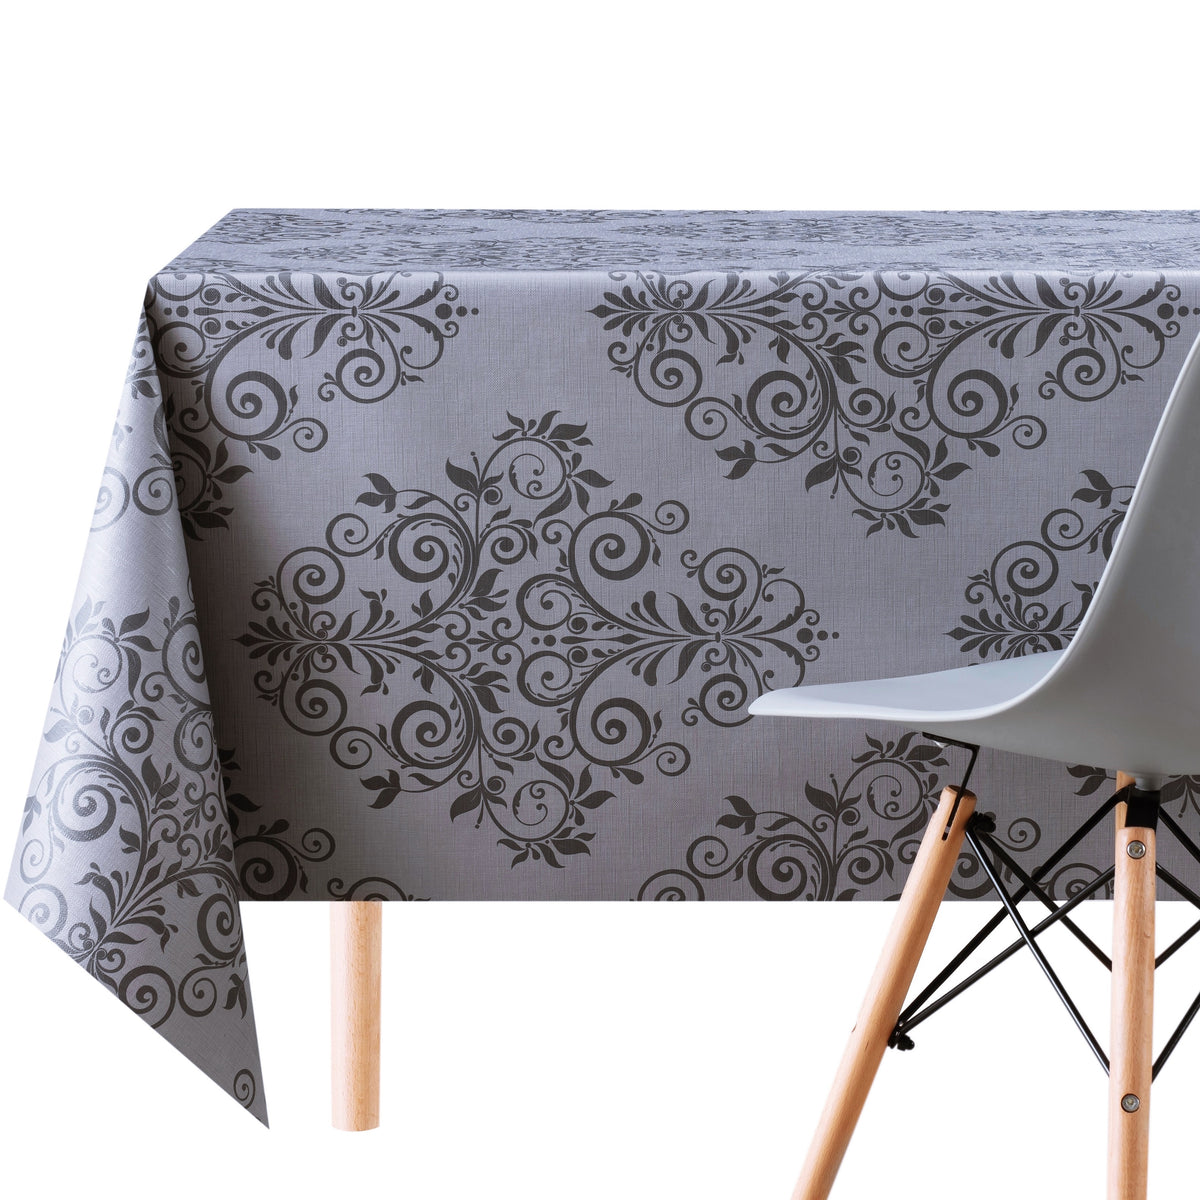 EMBOSSED PVC TABLE CLOTH AMA DAMASK BLACK LEAVES THICK COVER WIPE ABLE PROTECTOR